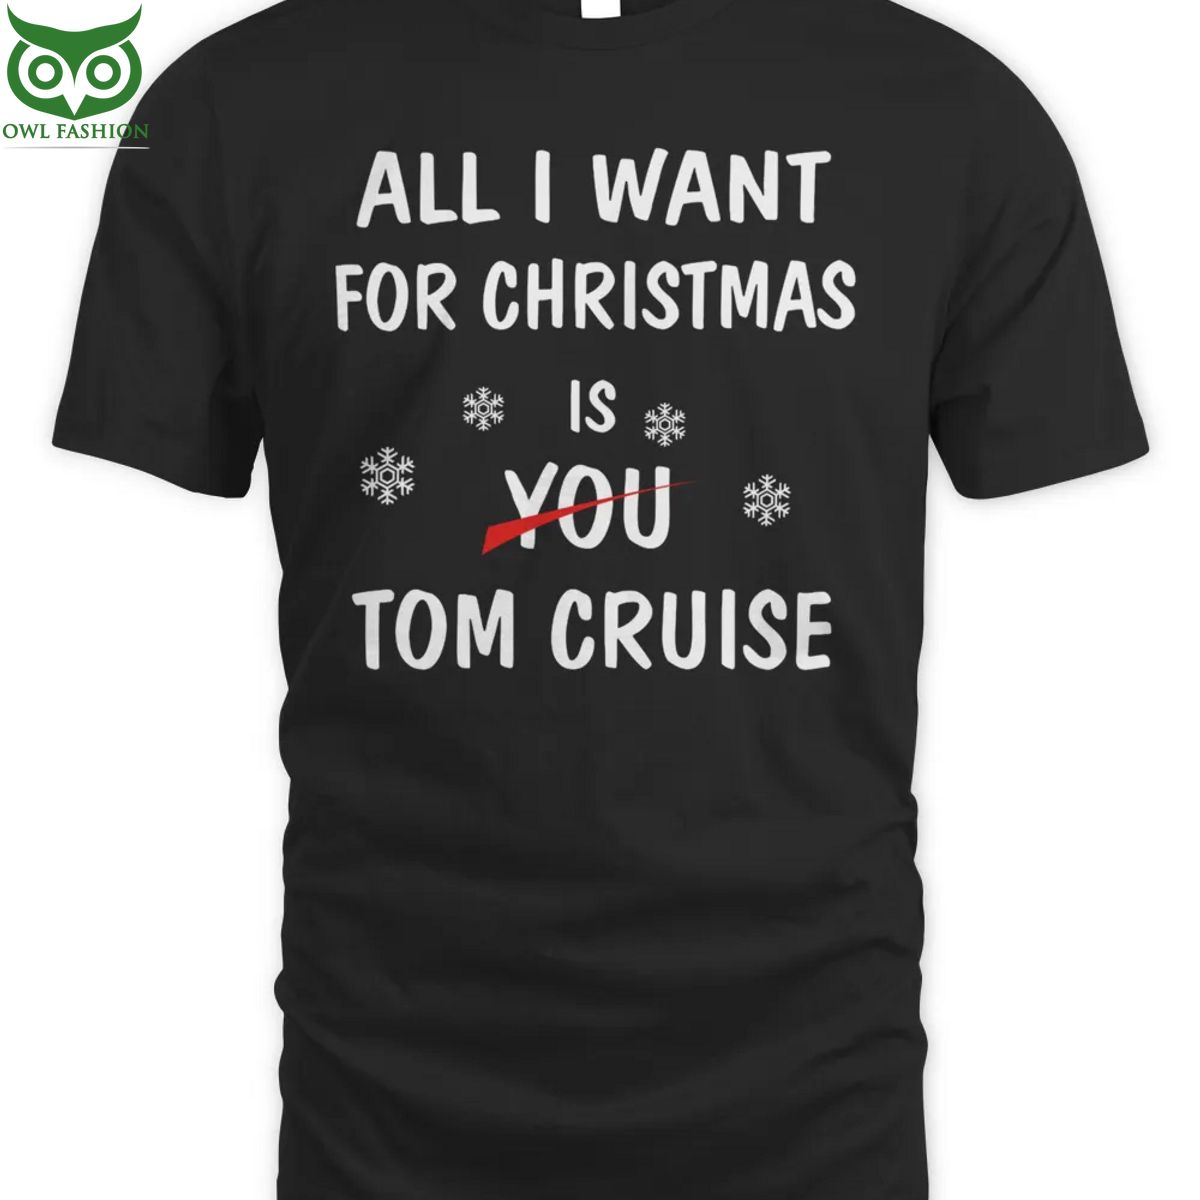 Tom Cruise All I want for christmas t shirt